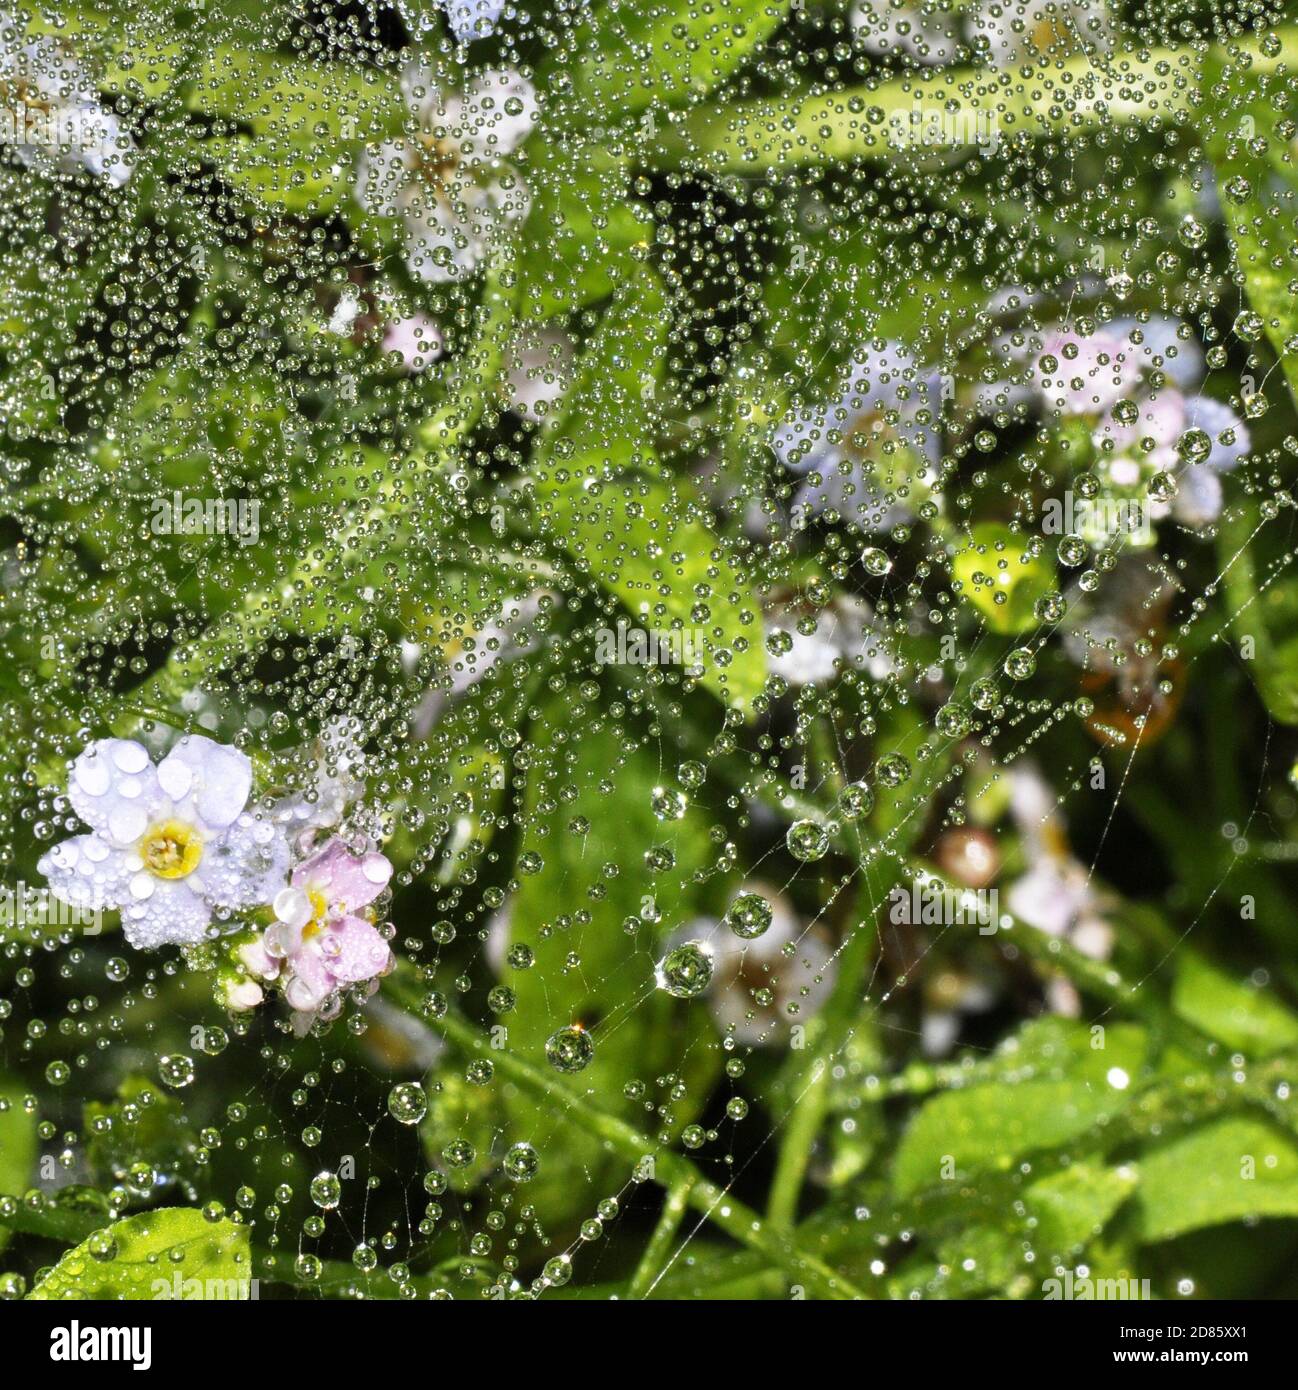 Dewdrops in a spiders web Stock Photo